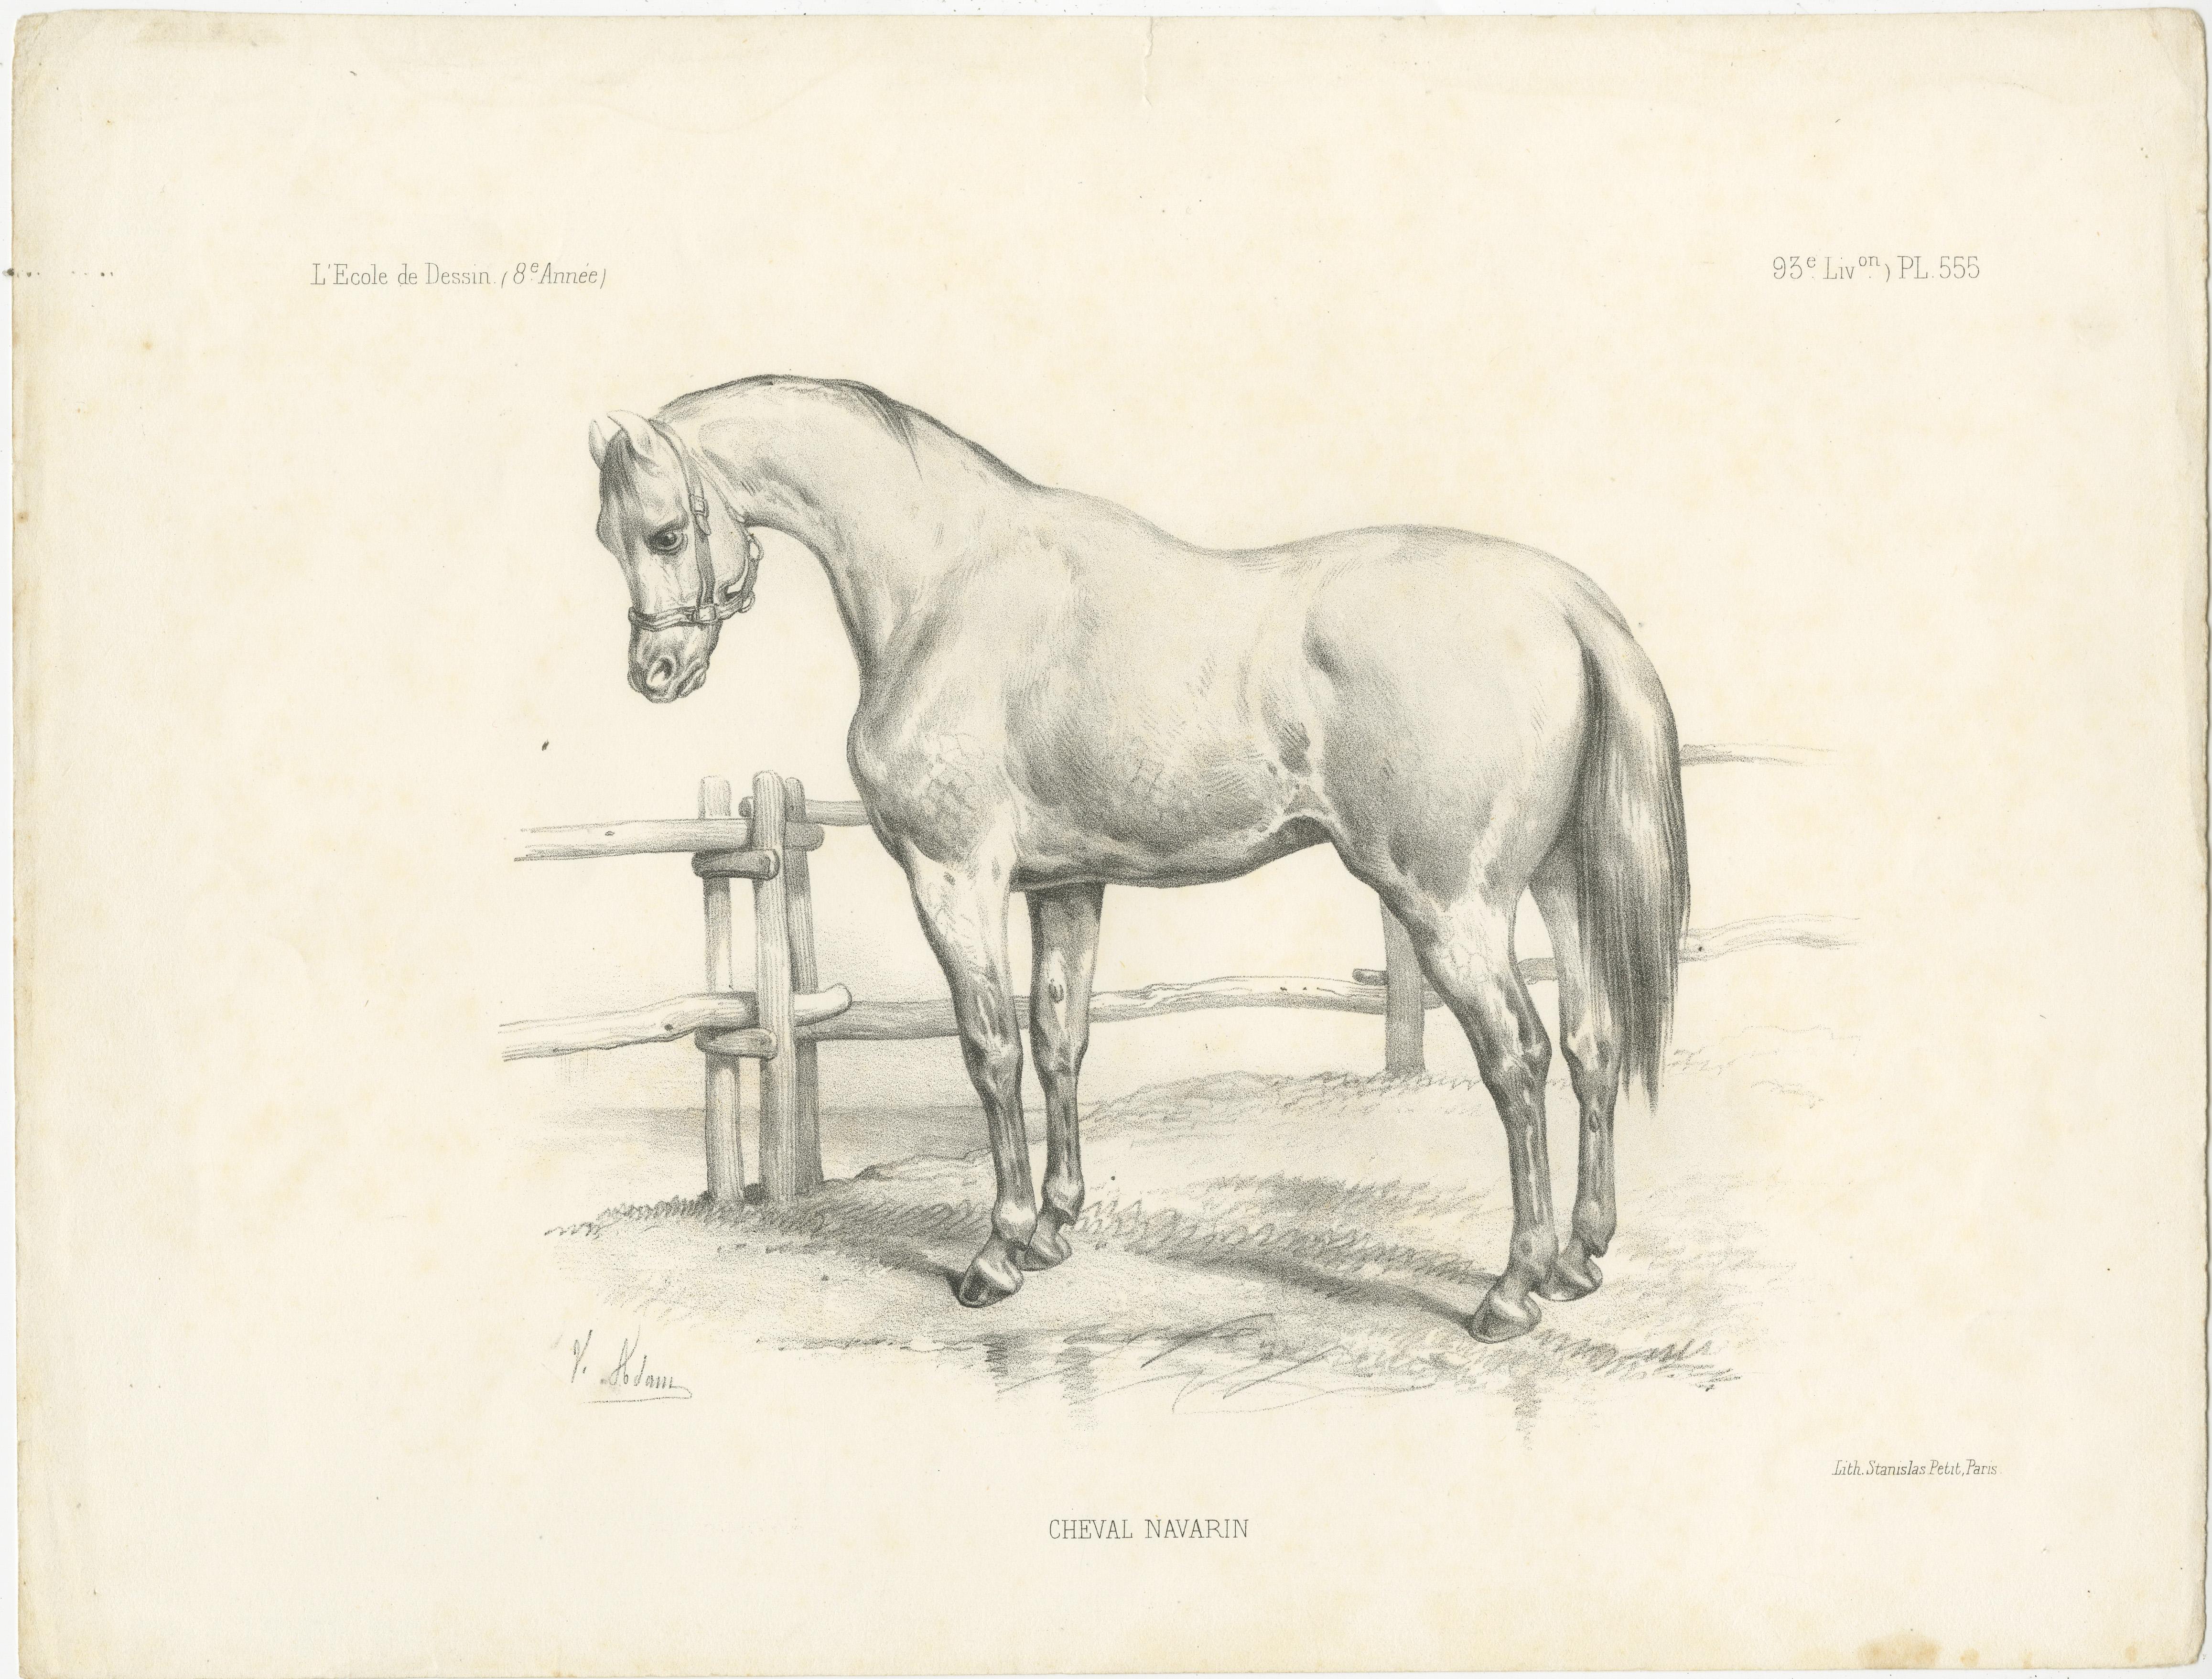 Antique print titled 'Cheval Navarin'. The Cheval Navarrin, also called Navarin, Navarrois, Tarbais, Tarbésan or Bigourdin, is an extinct breed of light saddle-horse from south-western France. Lithographed by Stanislas Petit, Paris. Published circa